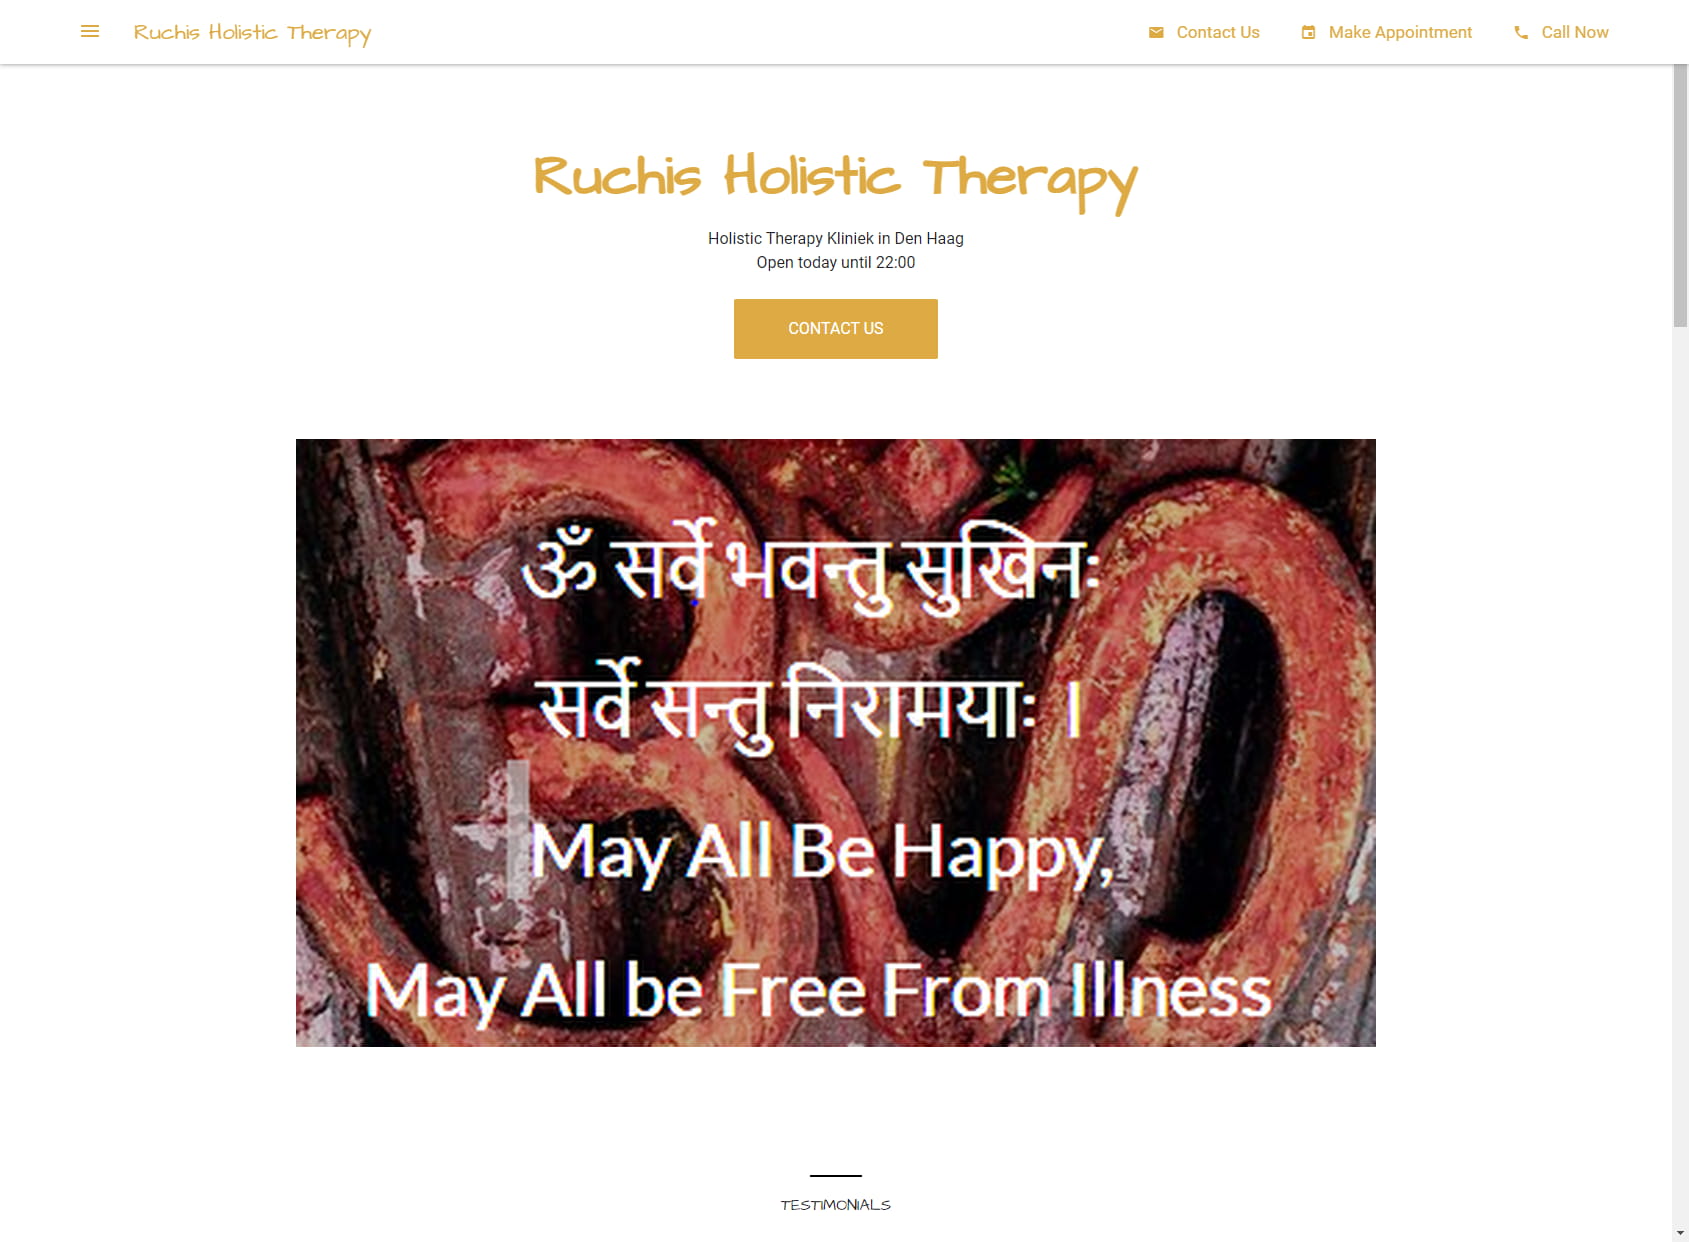 Ruchis Holistic Therapy